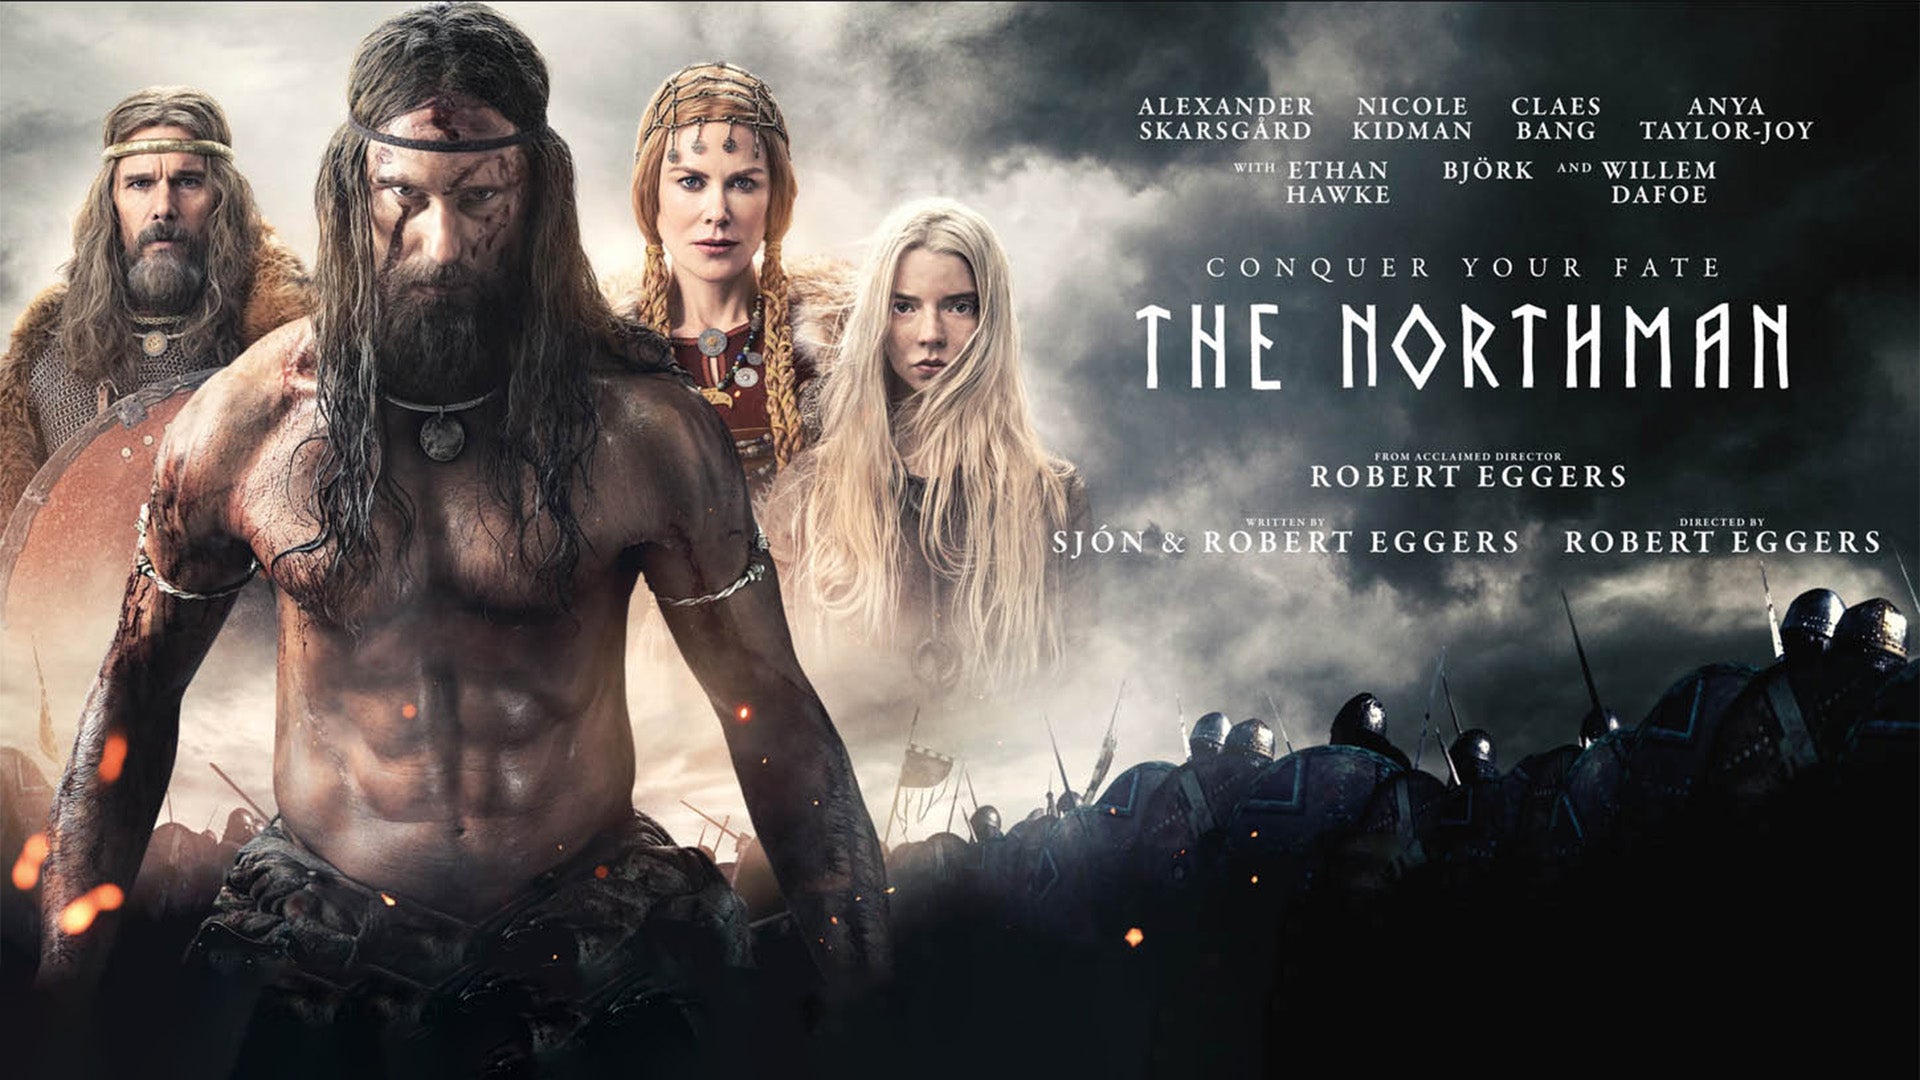 the northman bande annonce DVD, Blu Ray et 4K